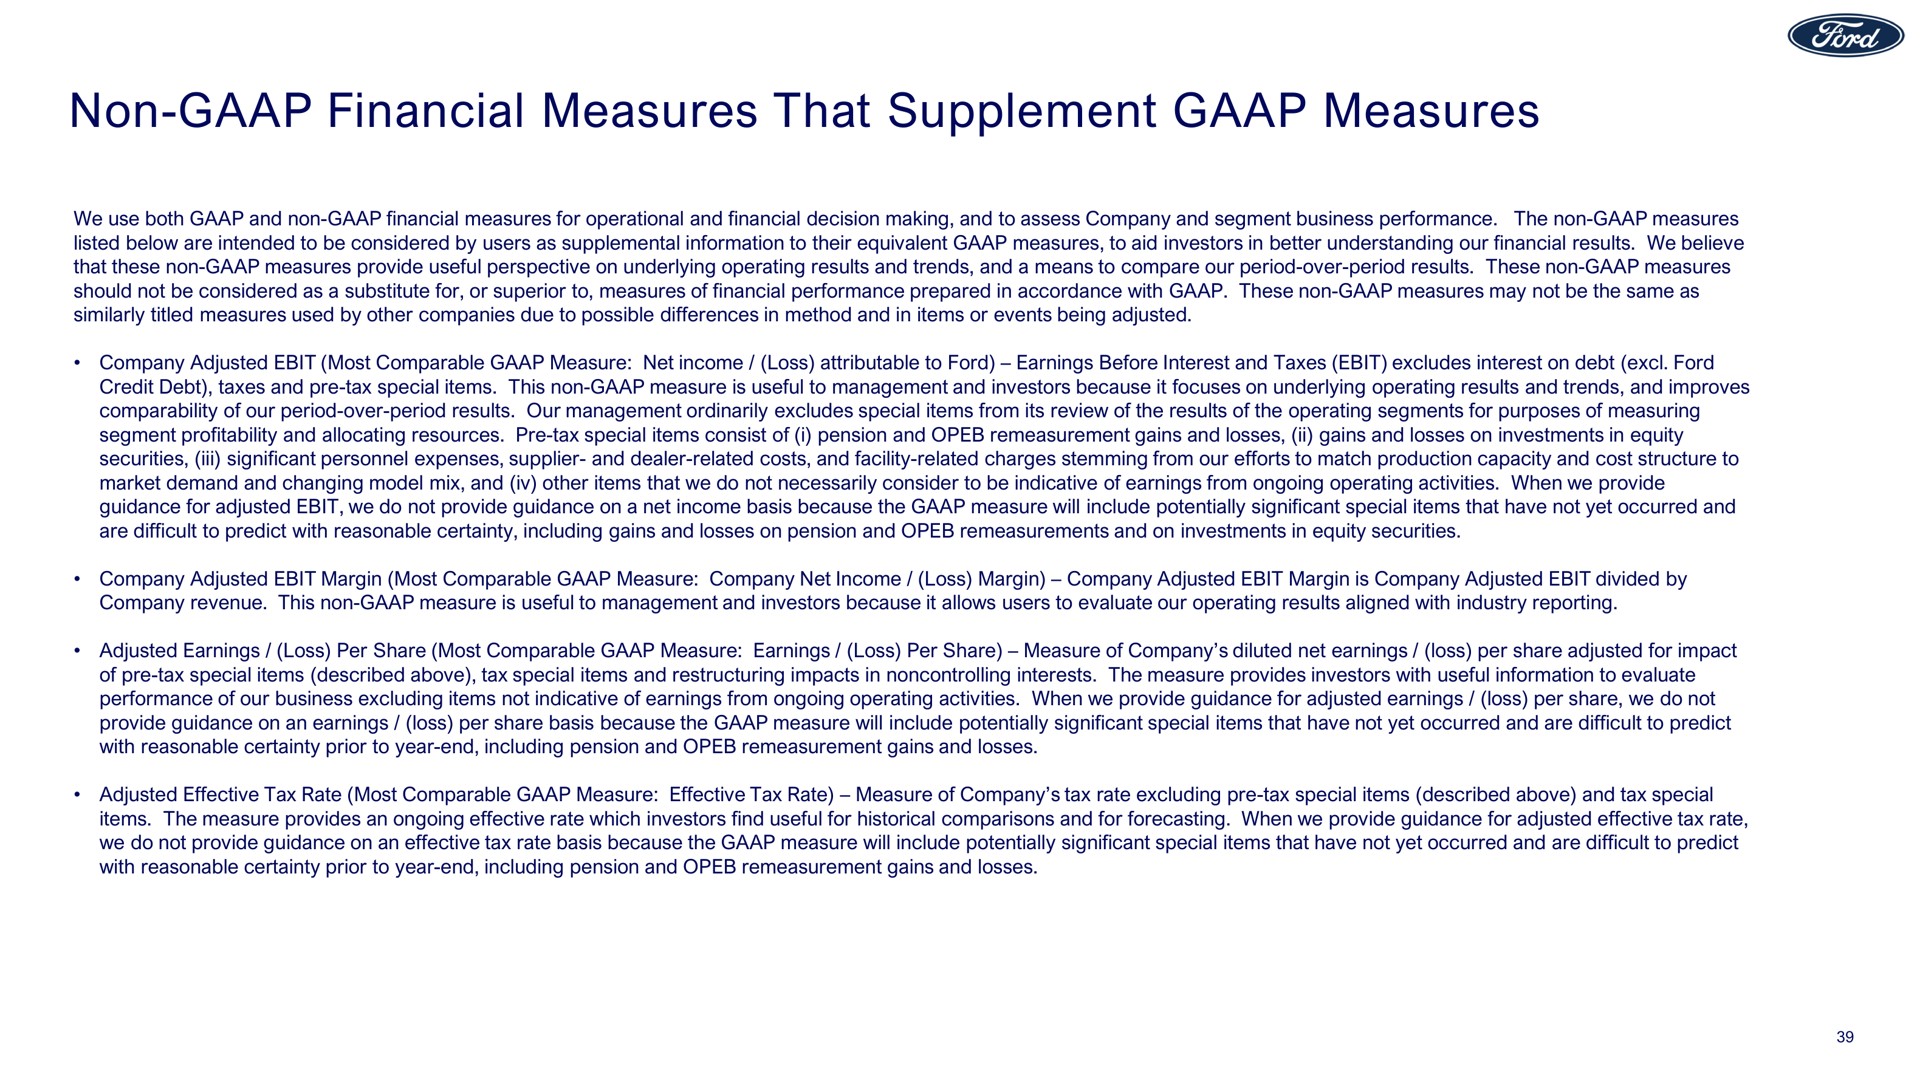 non financial measures that supplement measures | Ford